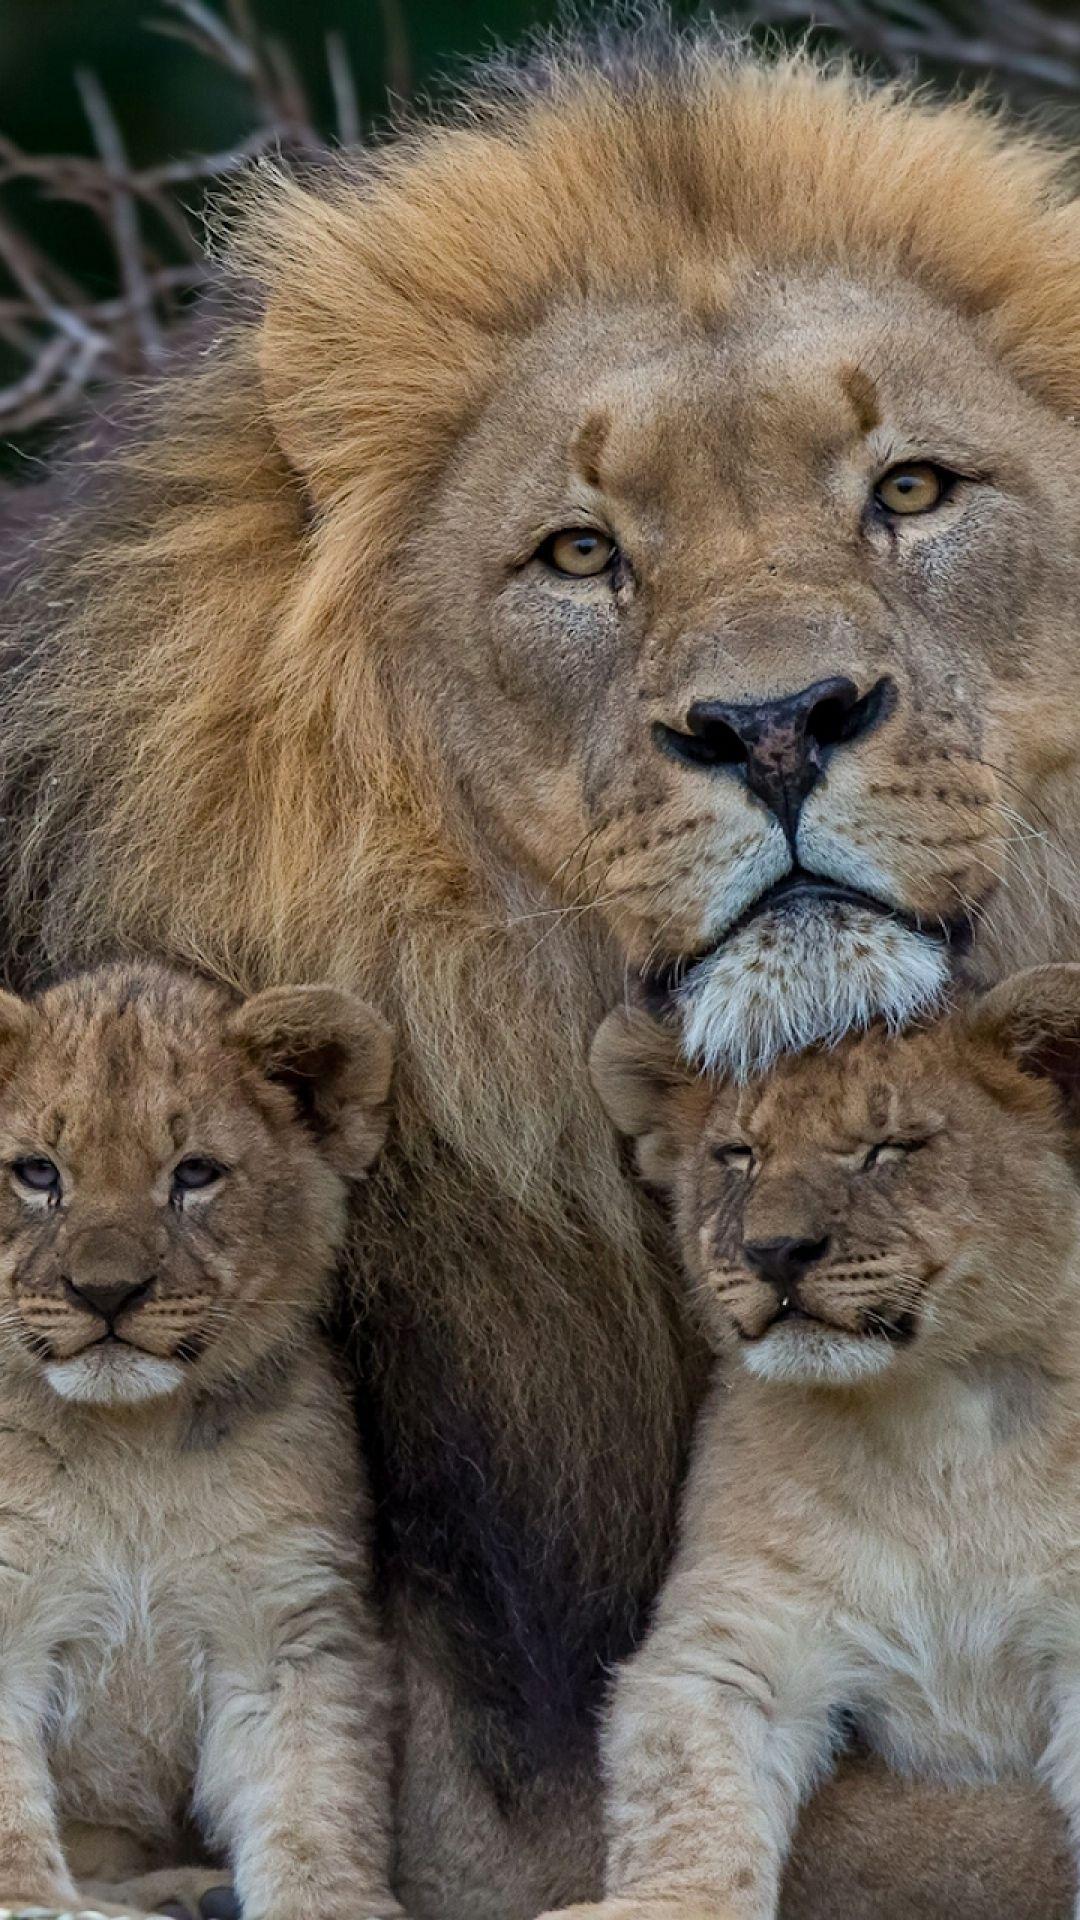 Download Wallpaper 1080x1920 lion, lioness, young, family, predators Sony Xperia Z ZL, Z, Samsung Galaxy S HTC One HD Background. Animals, Lions, Lion family